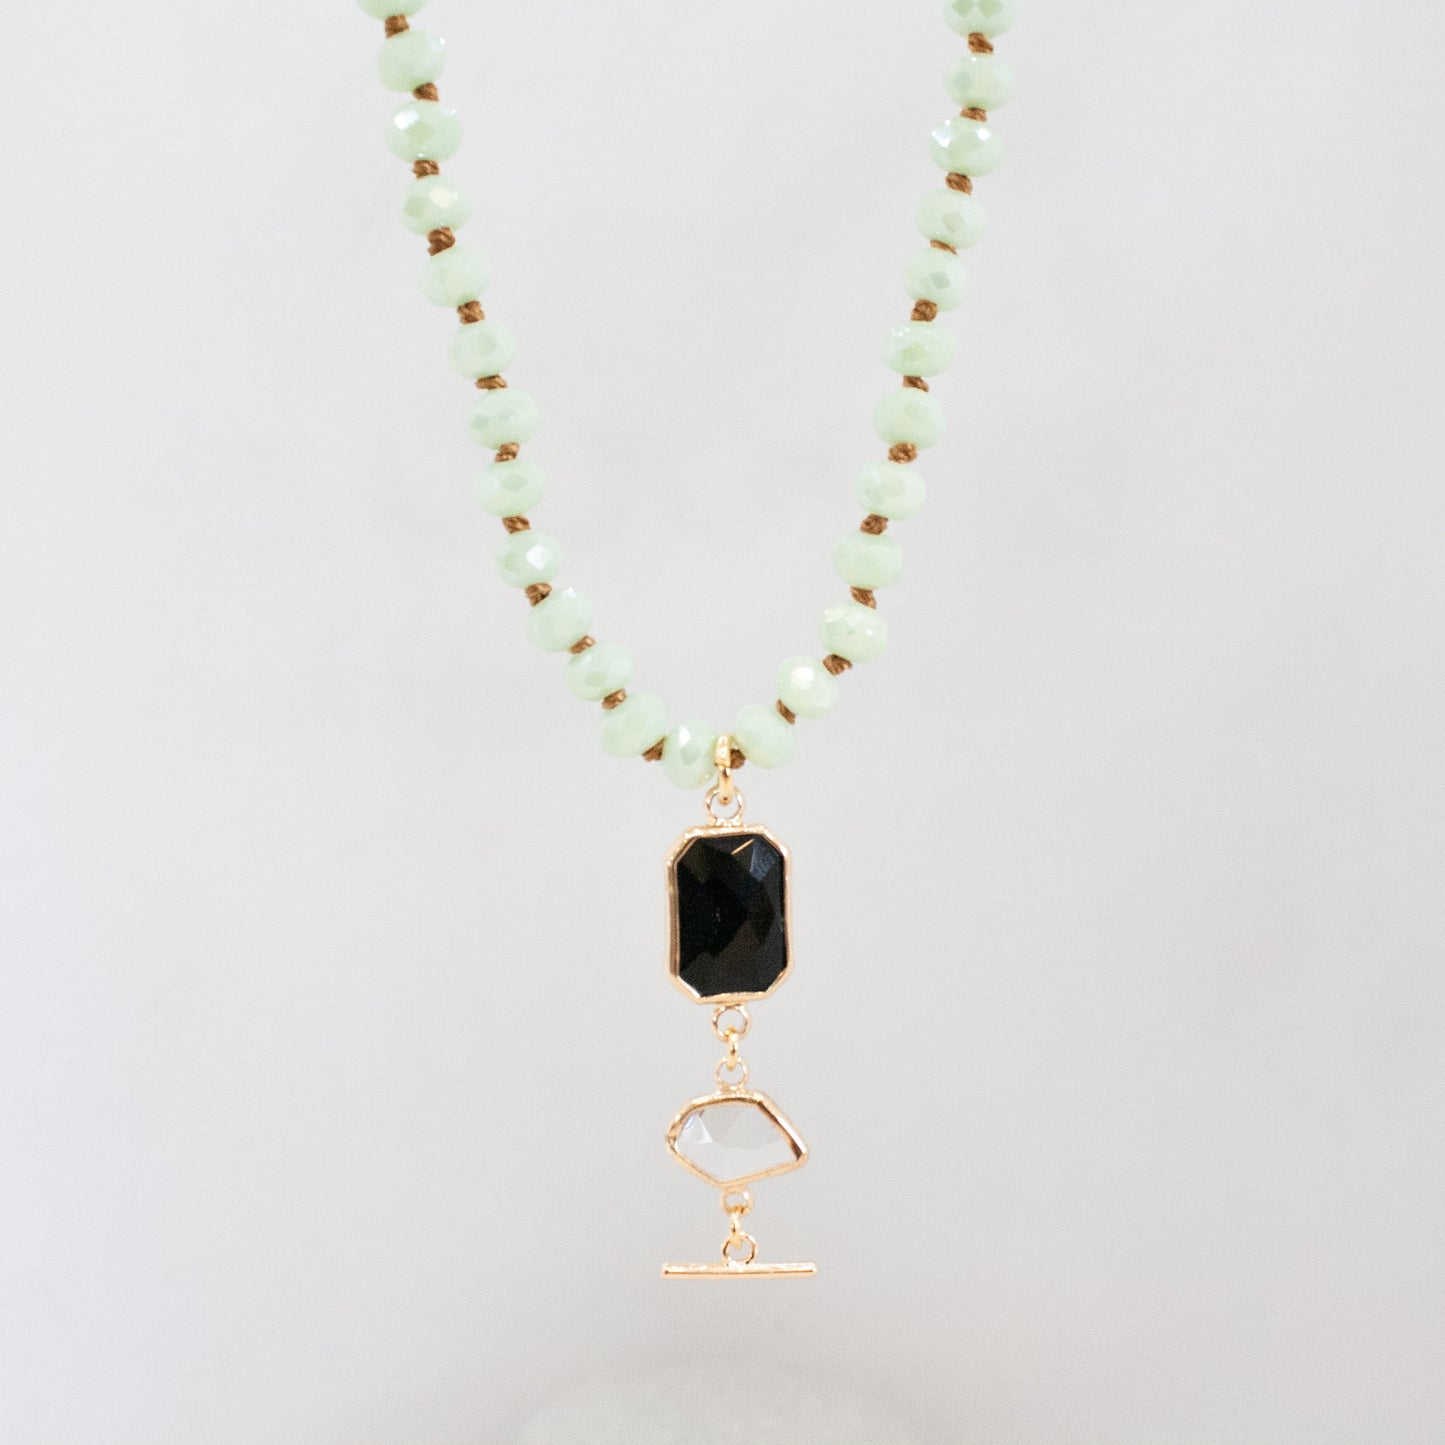 Spa Day Necklace :: Pearlized Mint